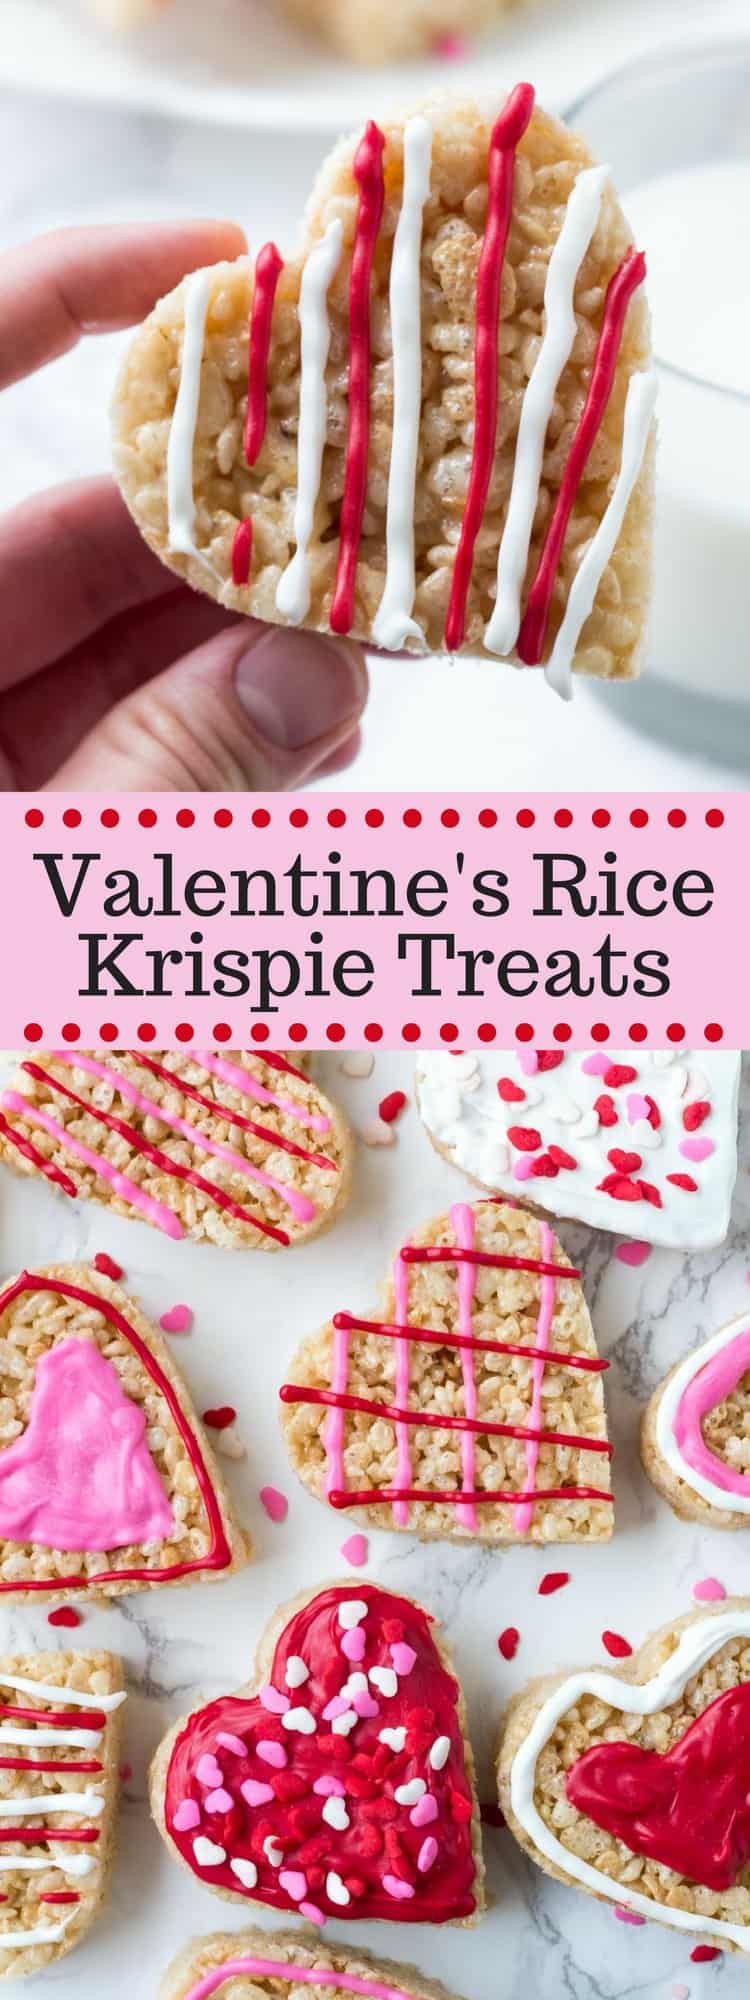 Valentine's Rice Krispie Treats decorated with icing and sprinkles